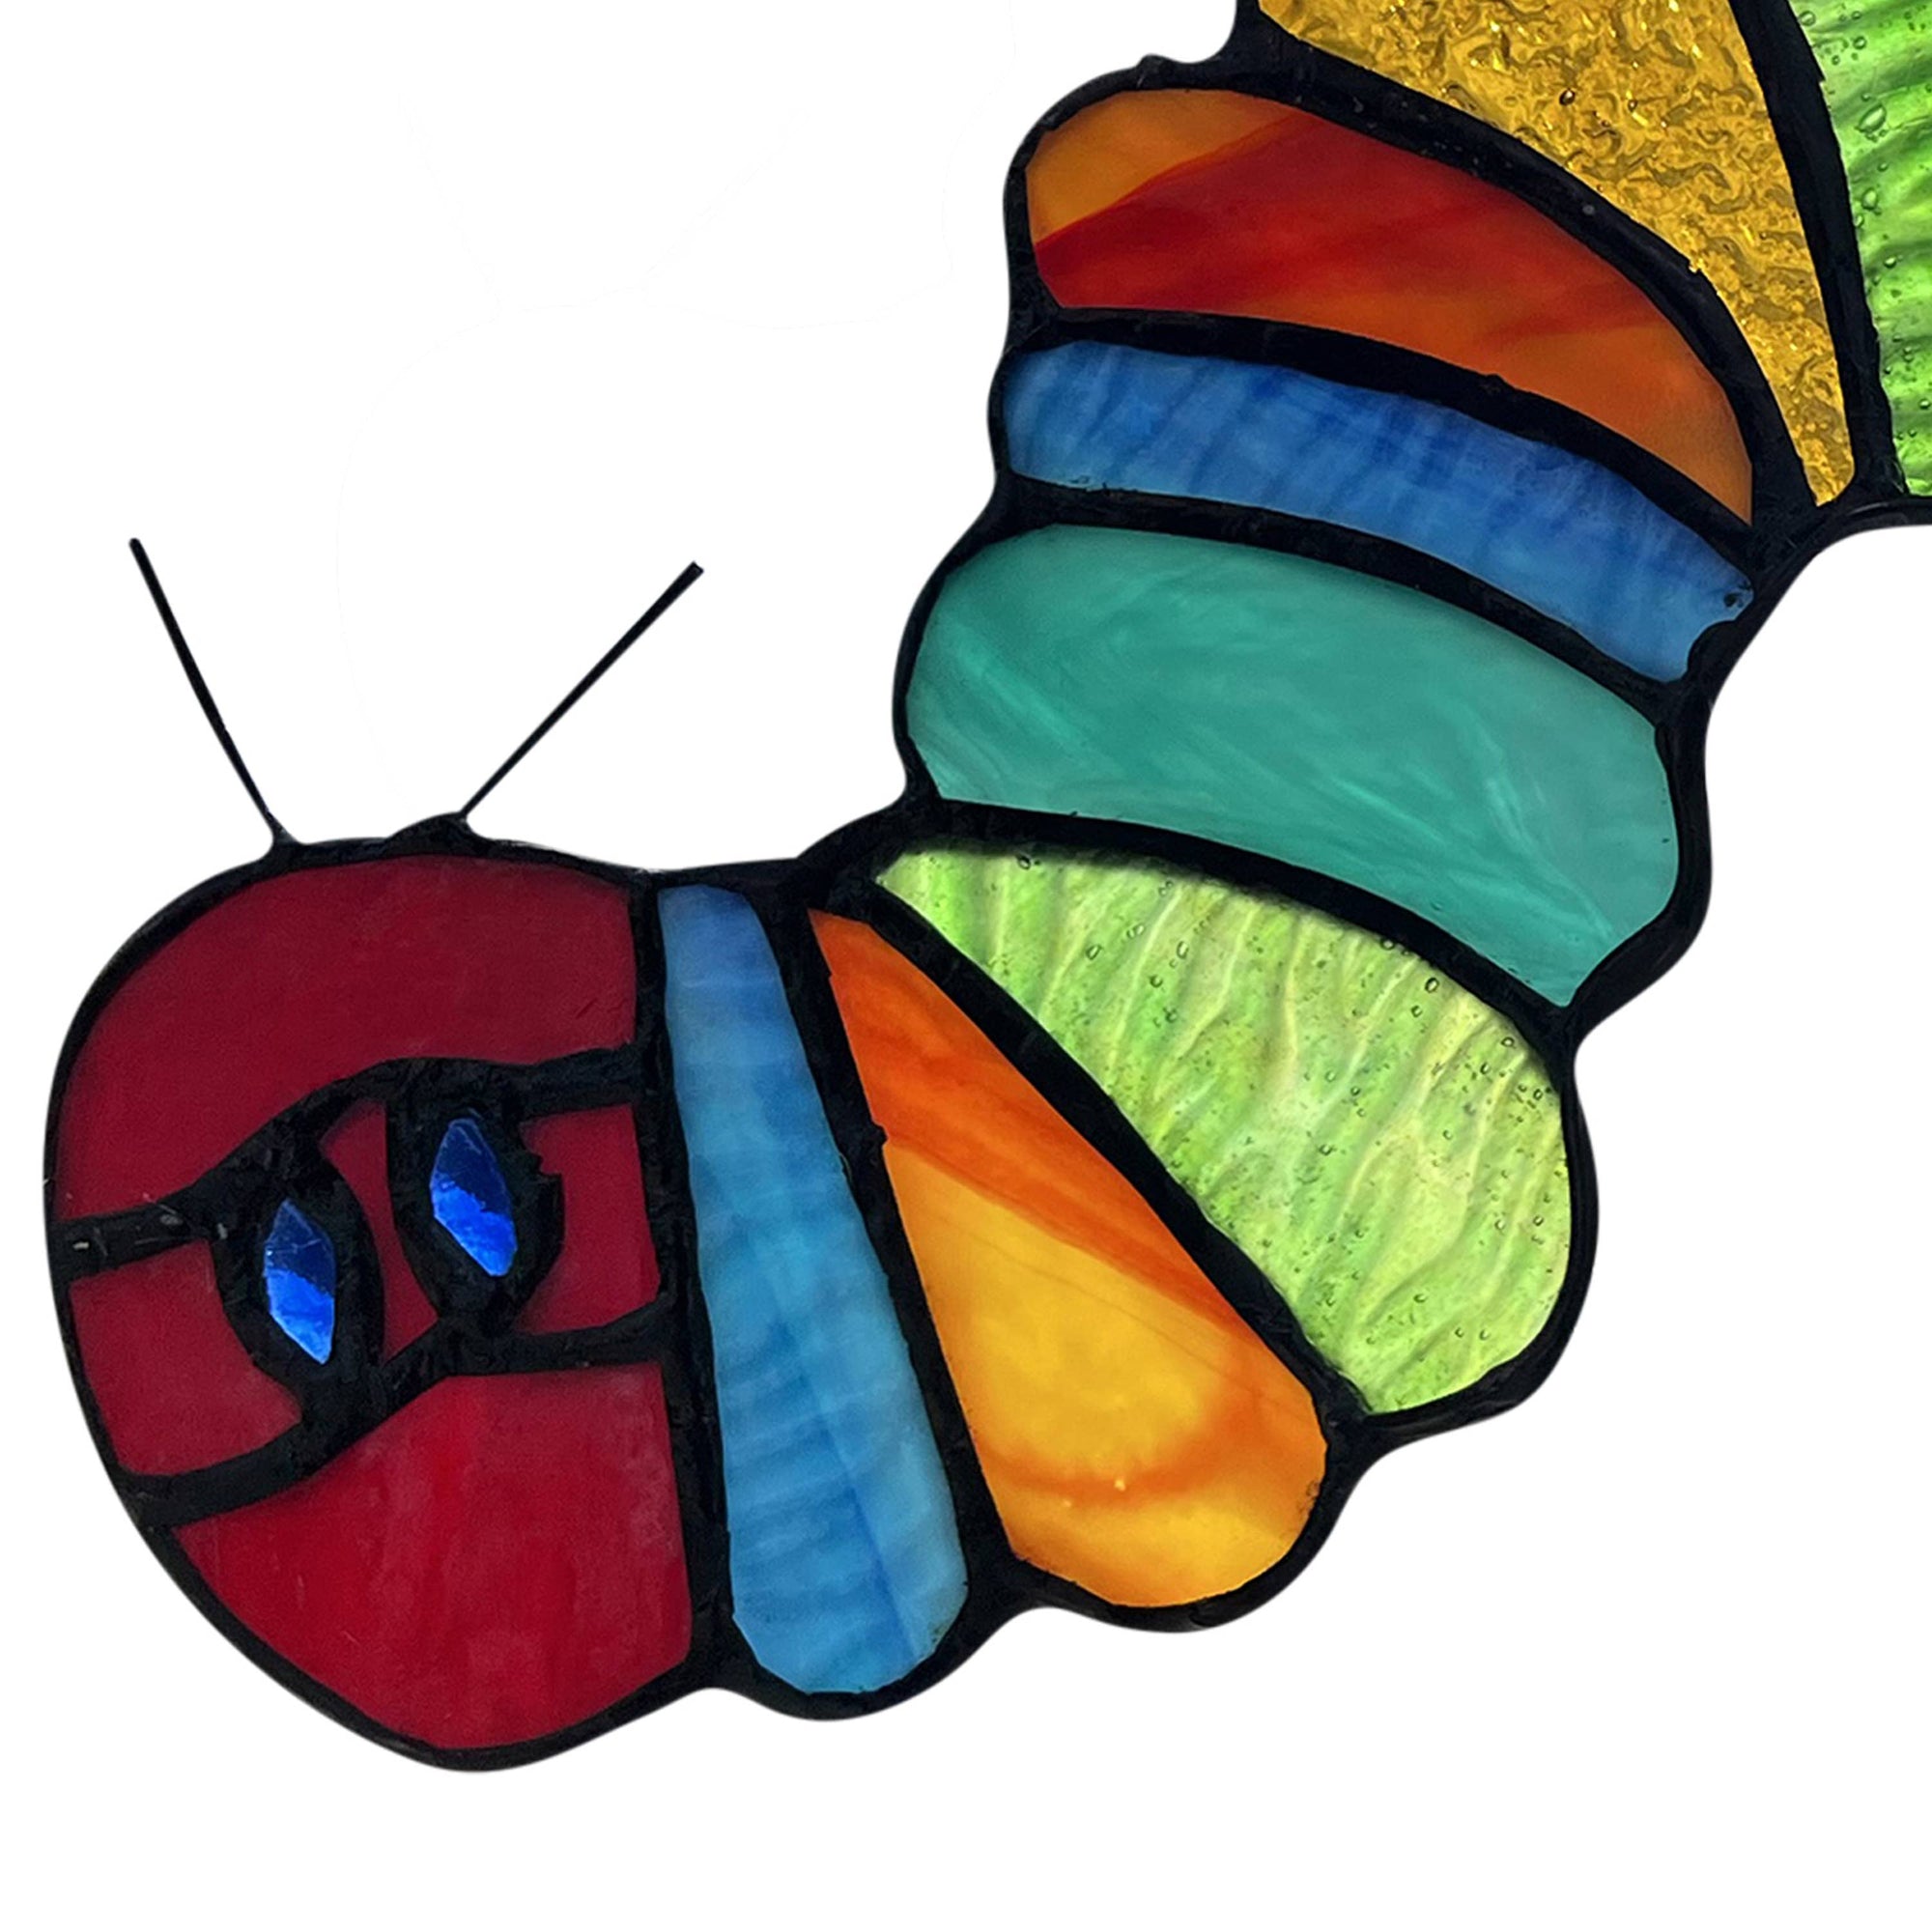 Colorful Hungry Caterpillar Stained Glass Window Panel 6.5"H